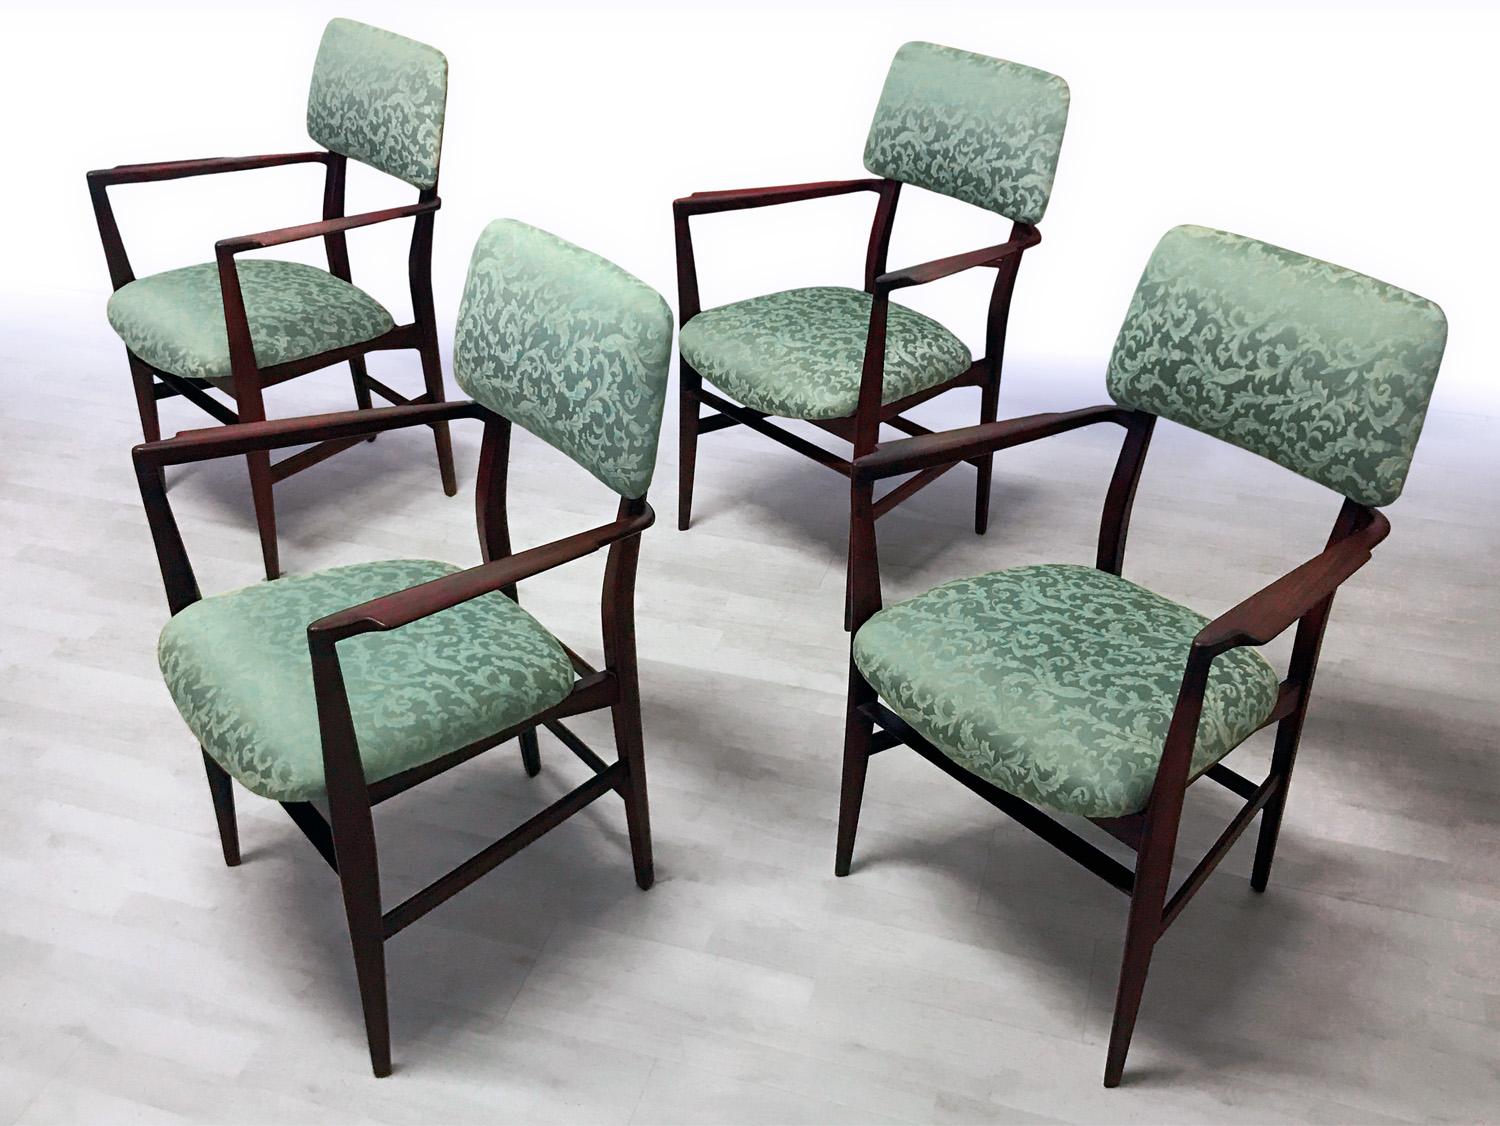 Elegant lines and solid teak wood structures for this set of four dining chairs, designed by Vittorio Dassi in the 1950s, with the collaboration of Edmondo Palutari, his internal designer of the Dassi Mobili Moderni.
The seats and backrests are